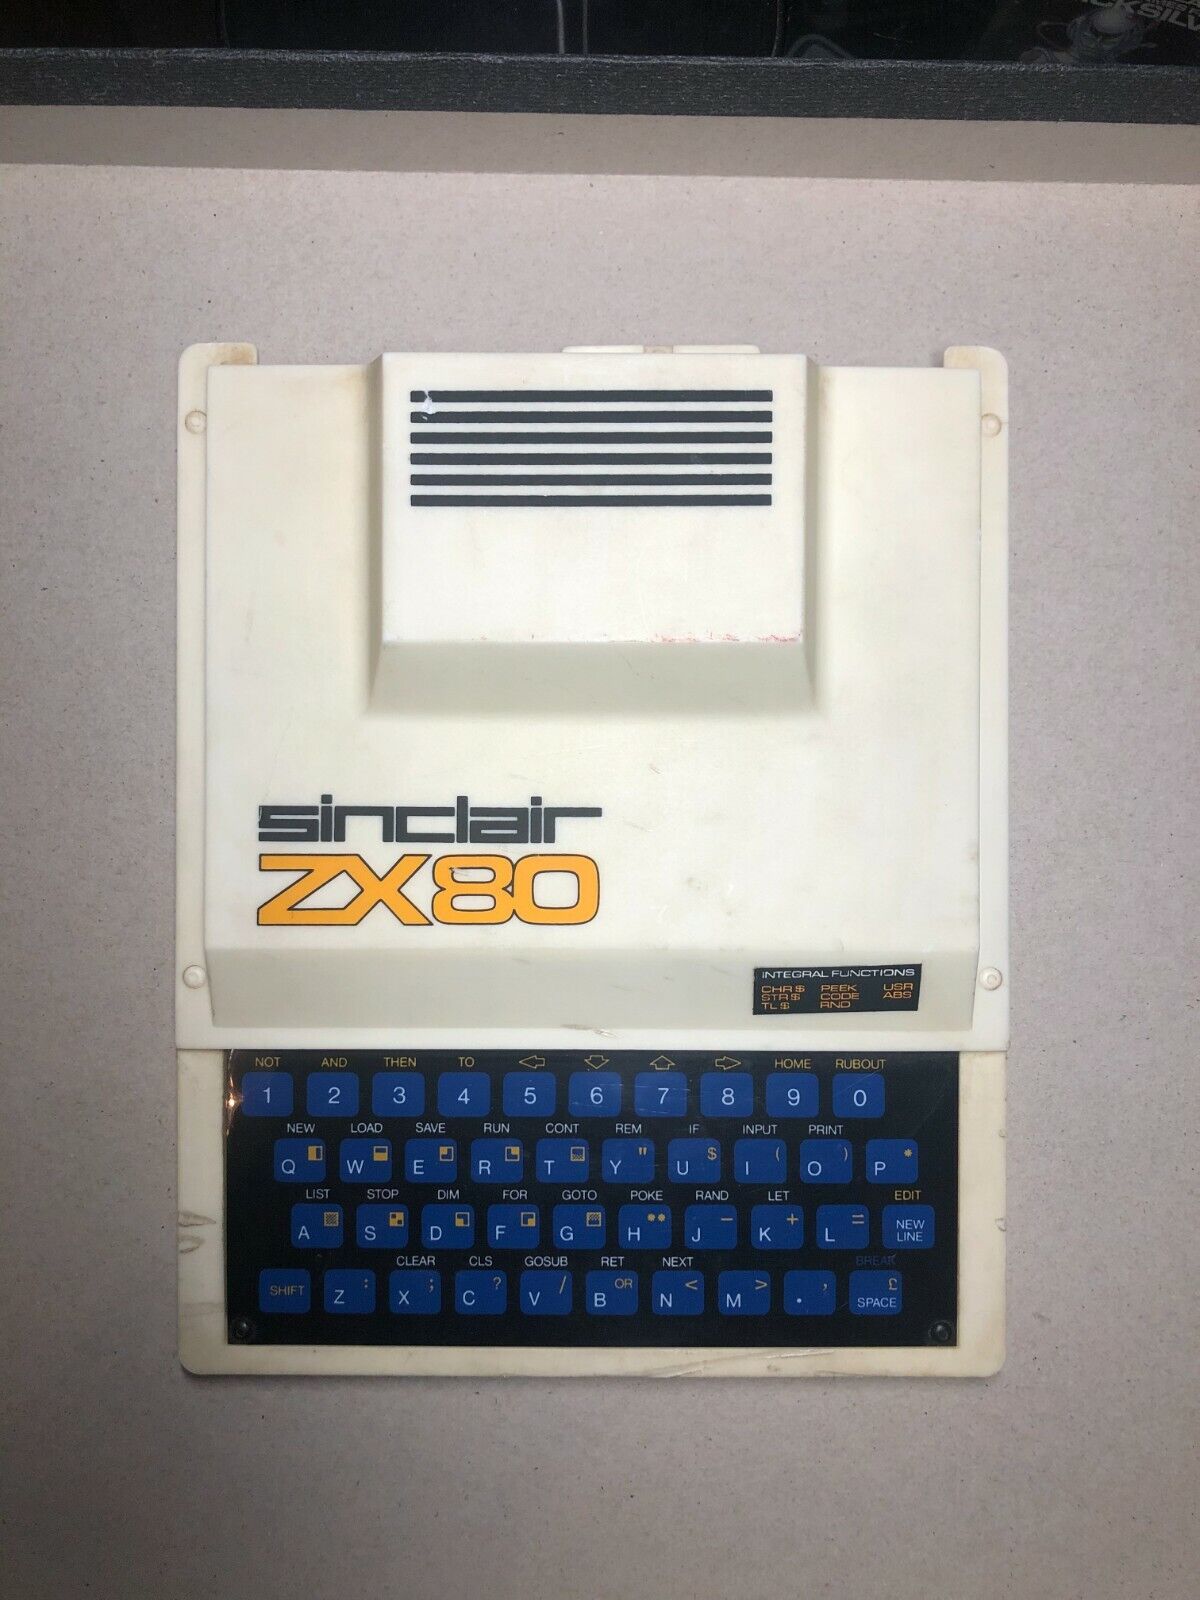 rare usa ntsc zx80 sinclair with psu, original manual, audio cable, video cable